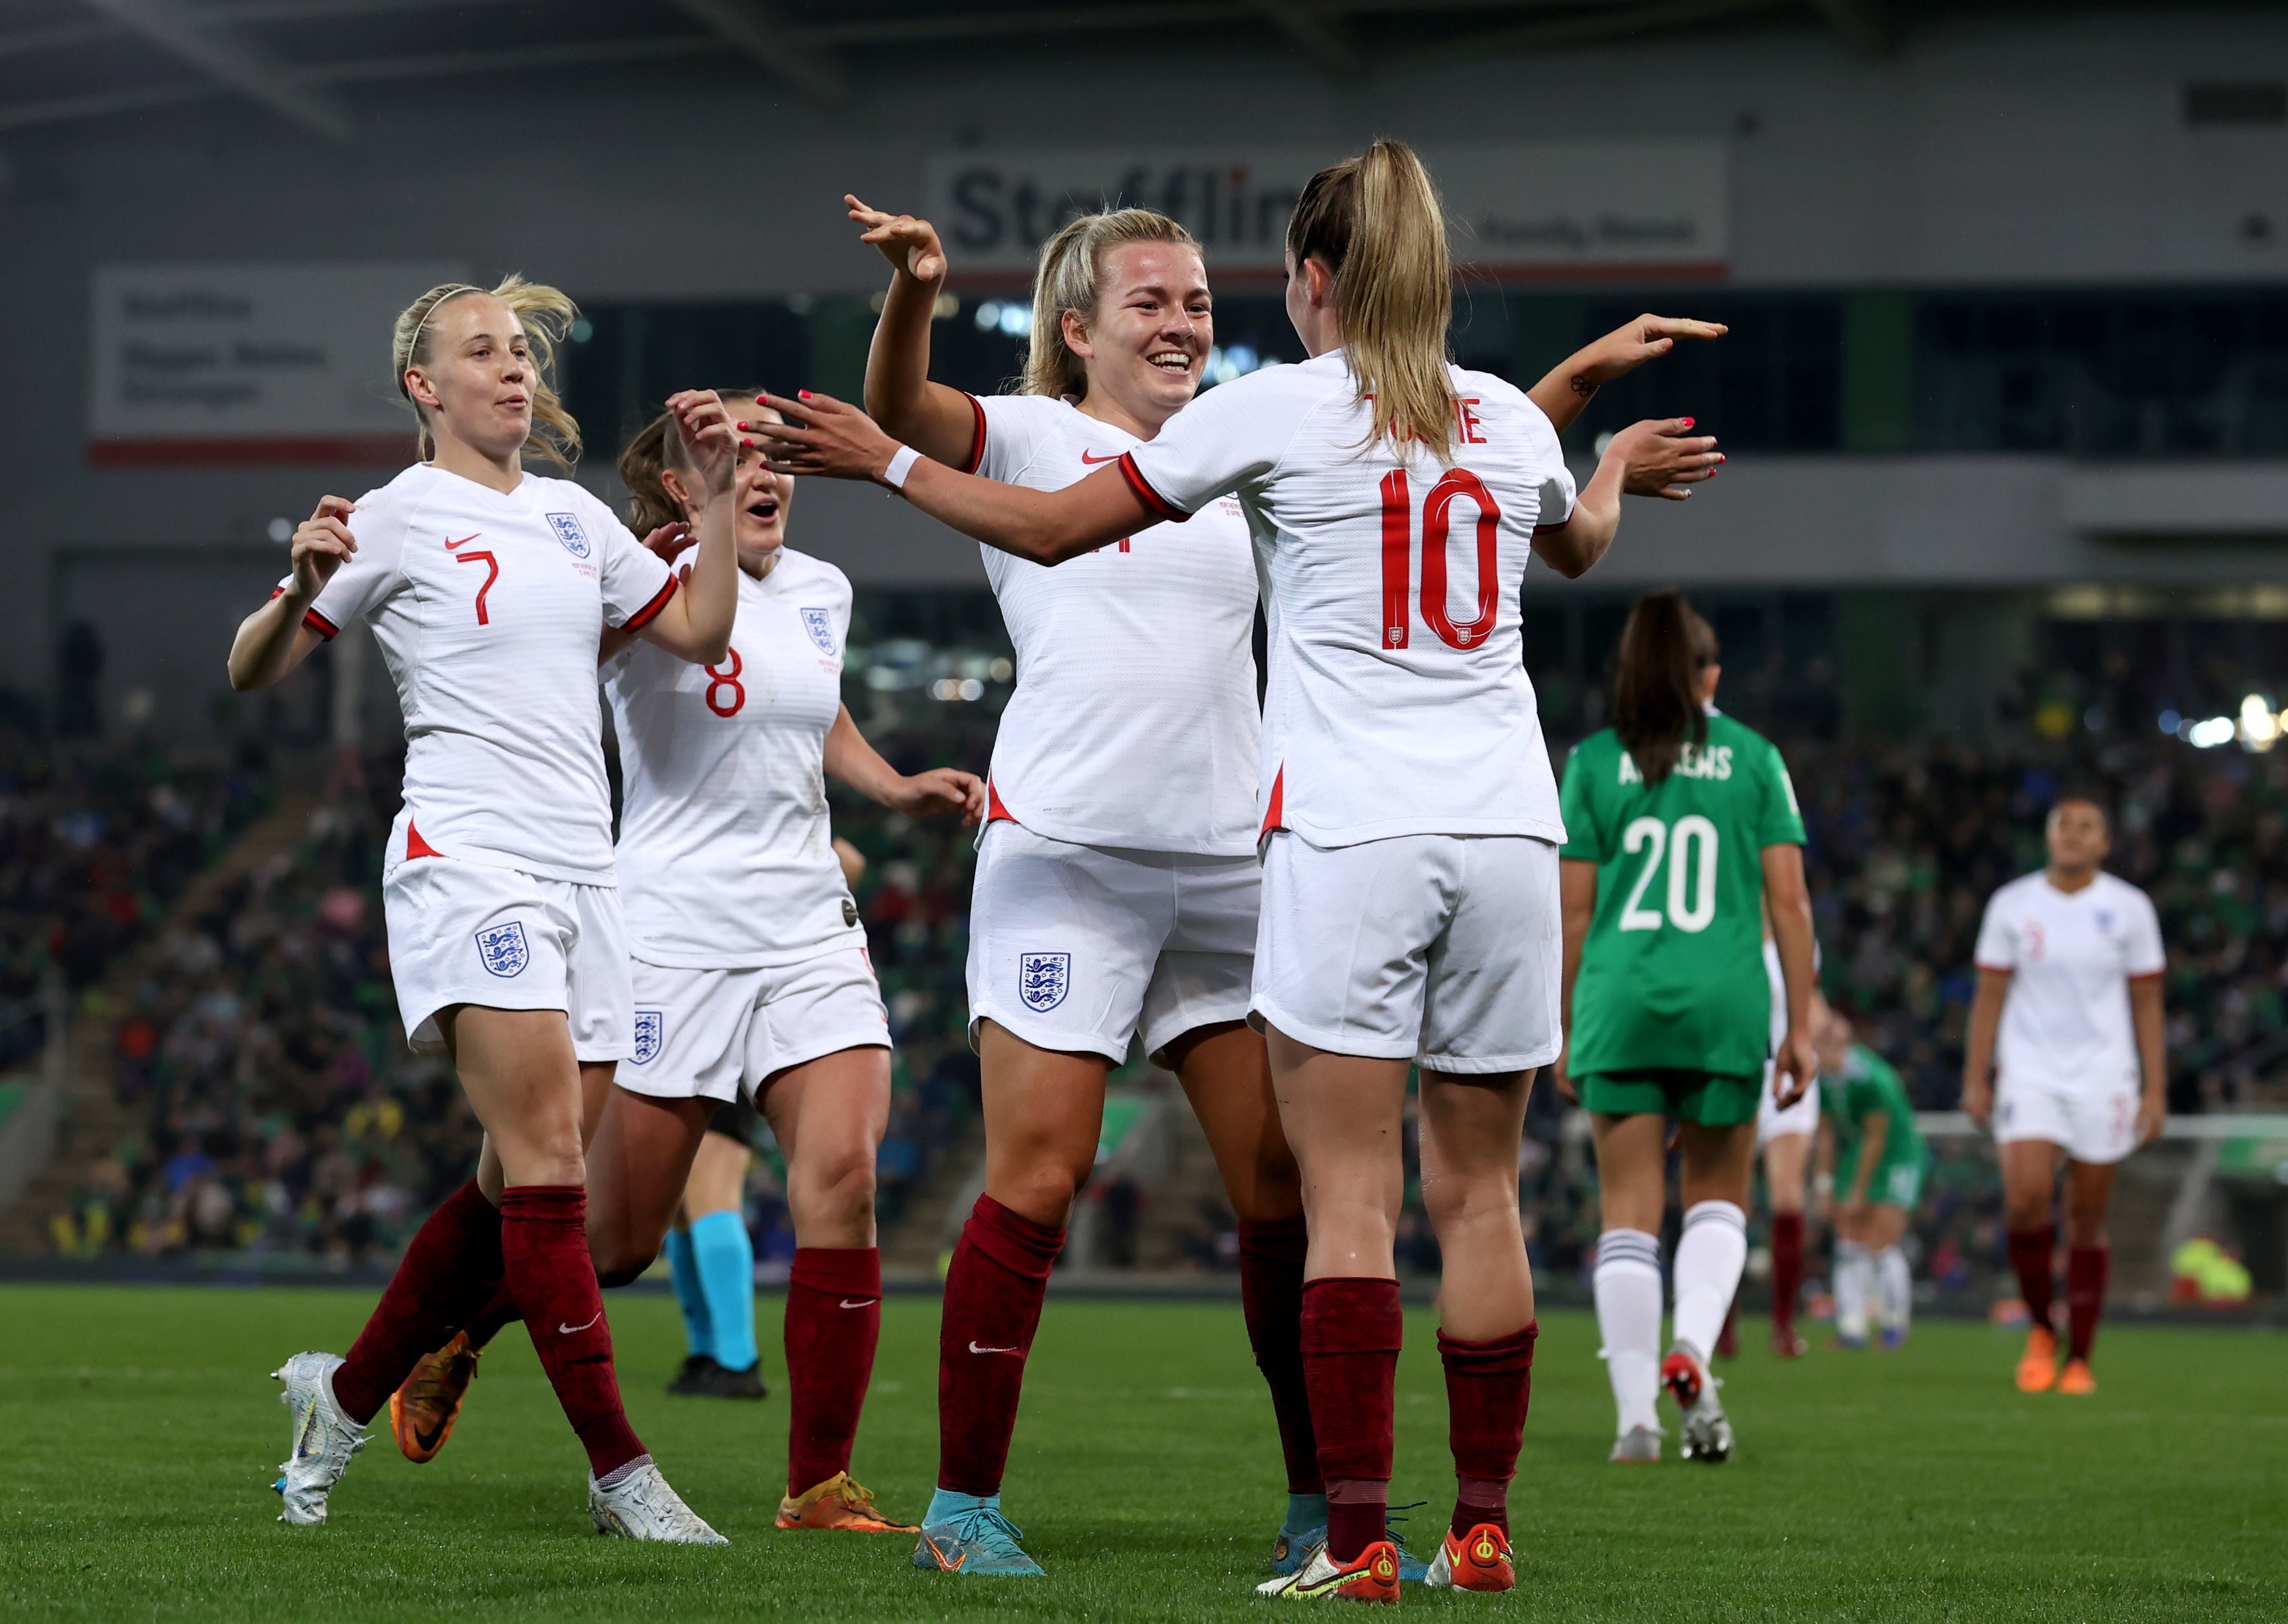 England and Northern Ireland square off in a Women’s World Cup qualifier